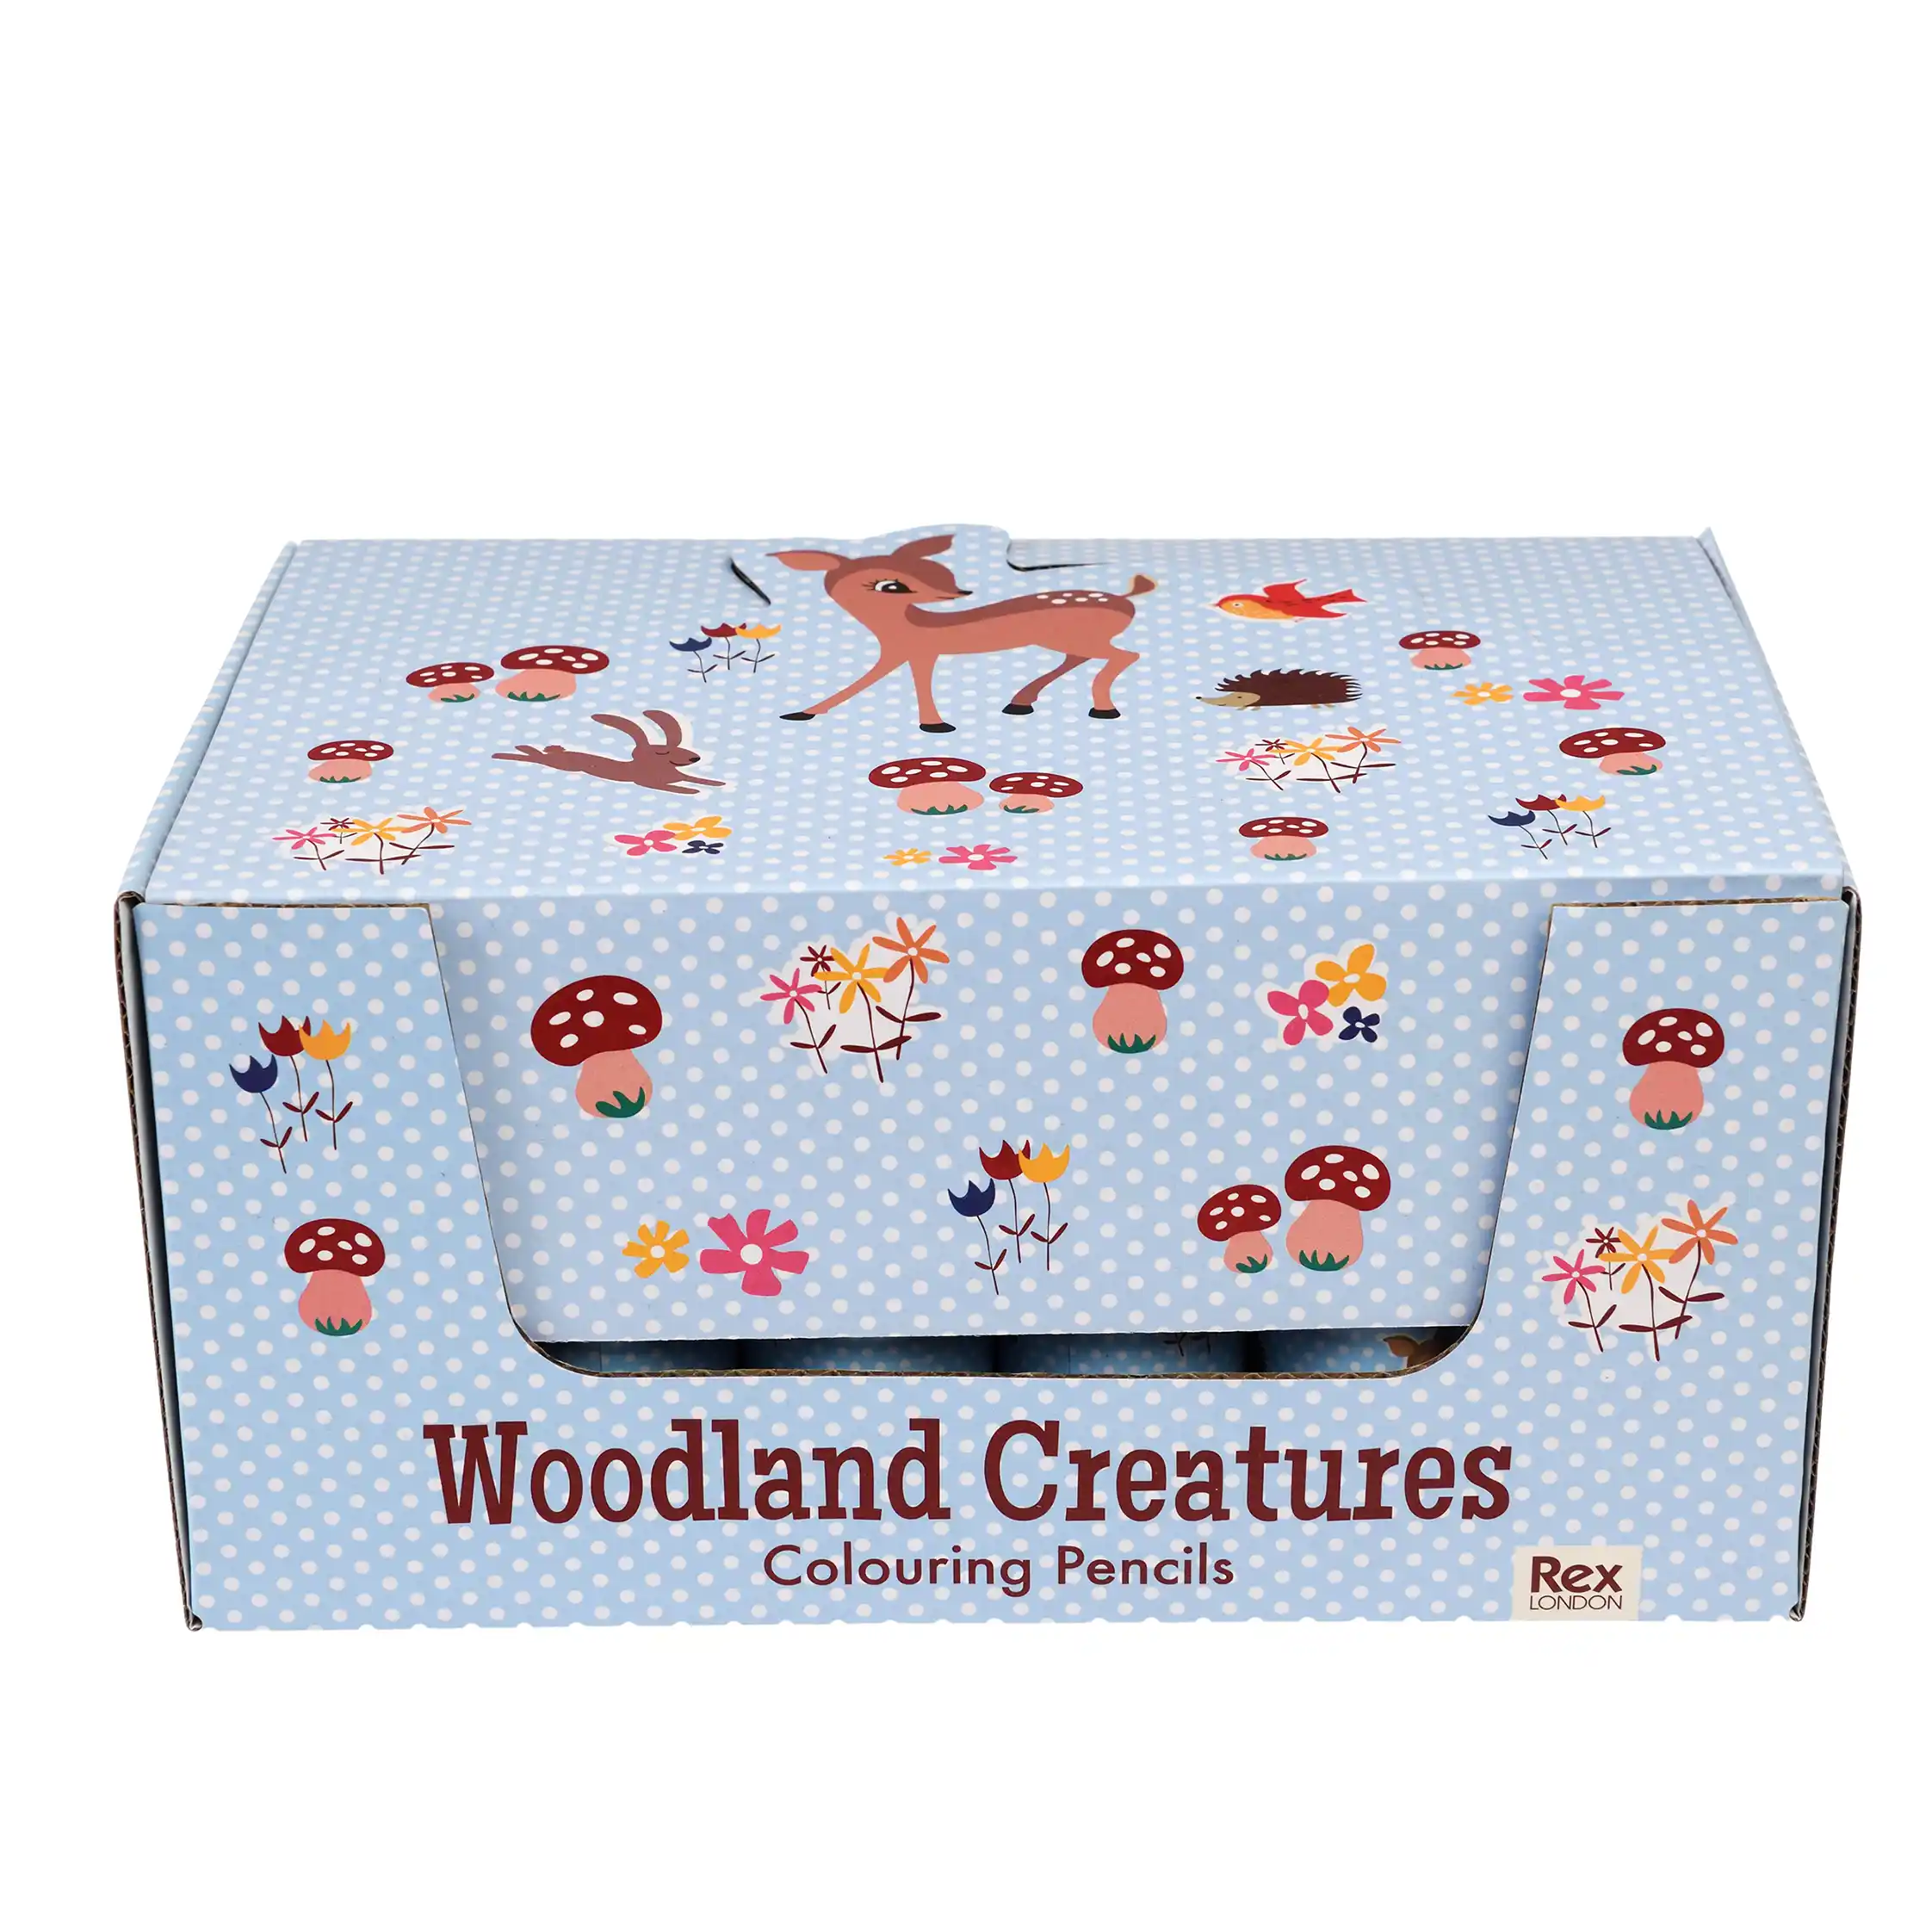 tube of colouring pencils - woodland creatures